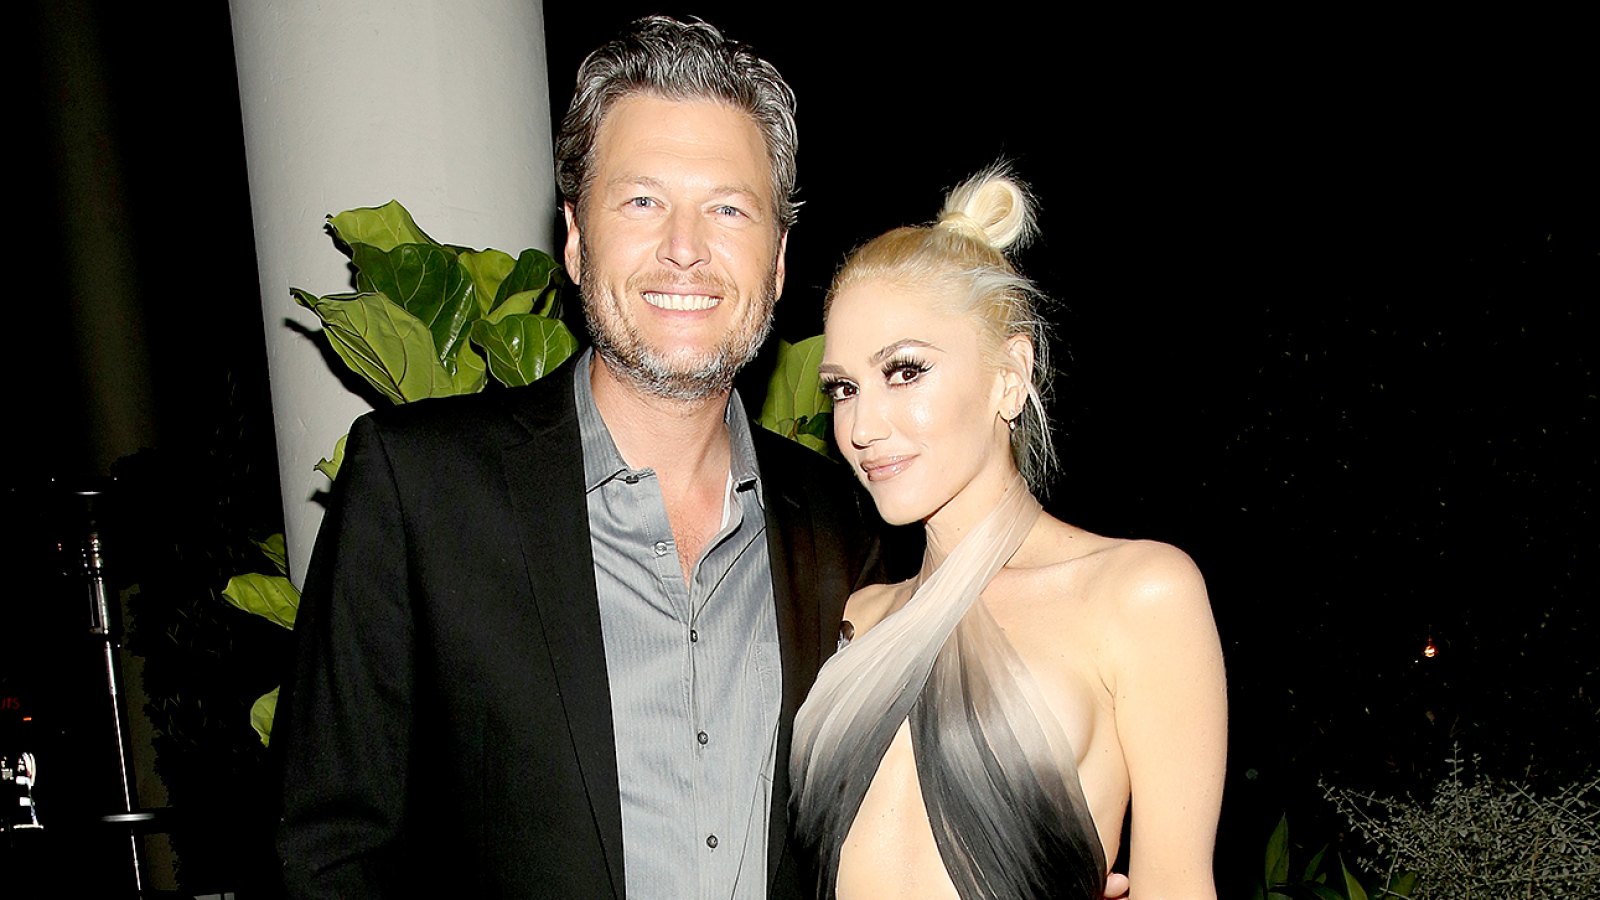 Blake Shelton and Gwen Stefani attend Glamour Women of the Year 2016 Dinner at Paley on November 14, 2016 in Hollywood, California.